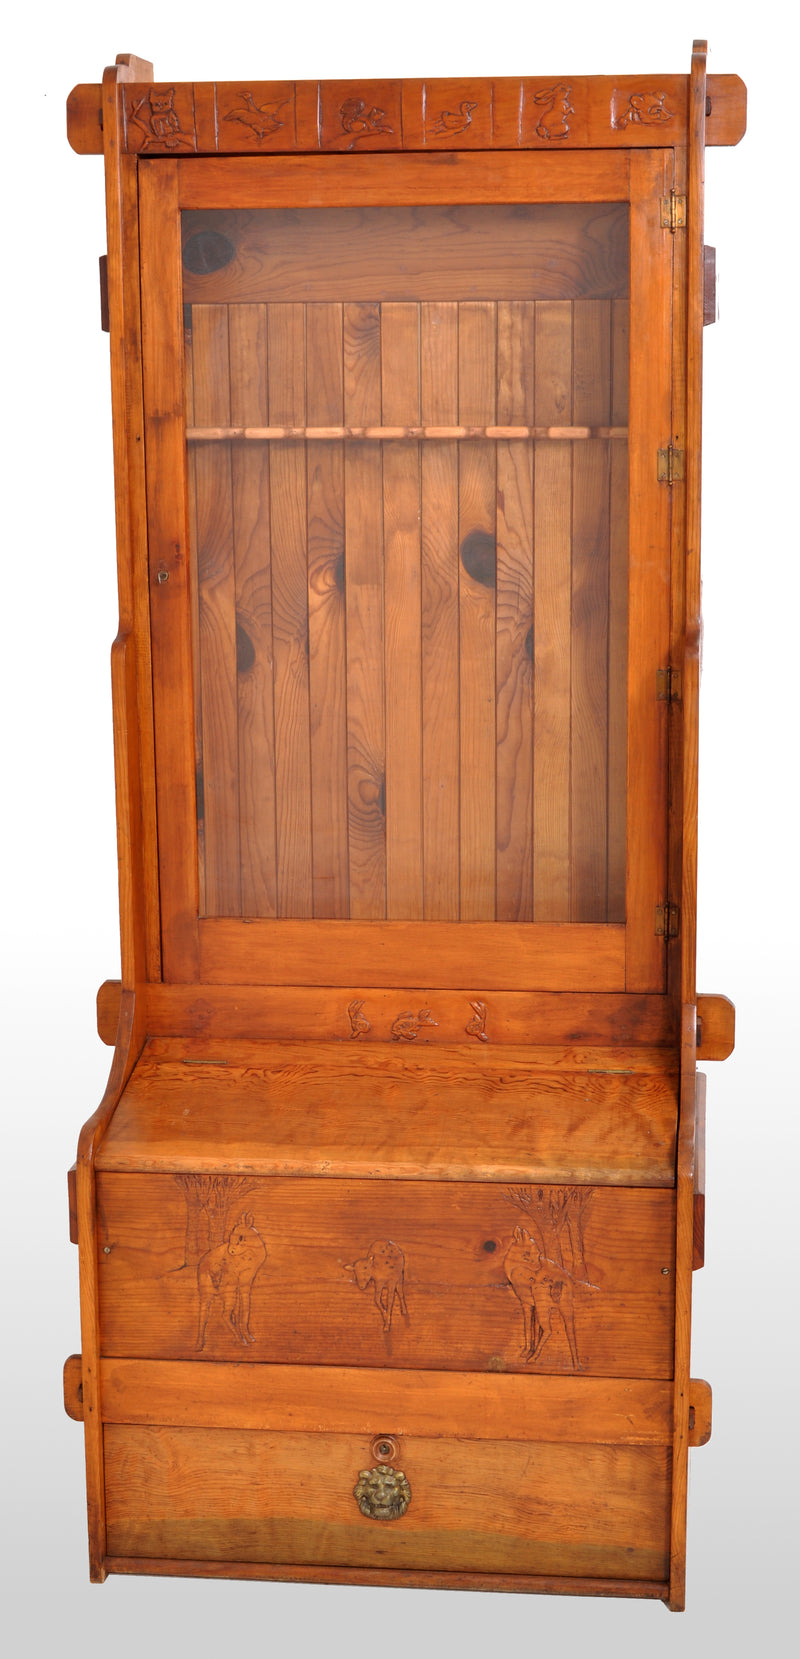 Antique American Carved Knotty Pine Country Gun / Rifle Display Cabinet, circa 1920